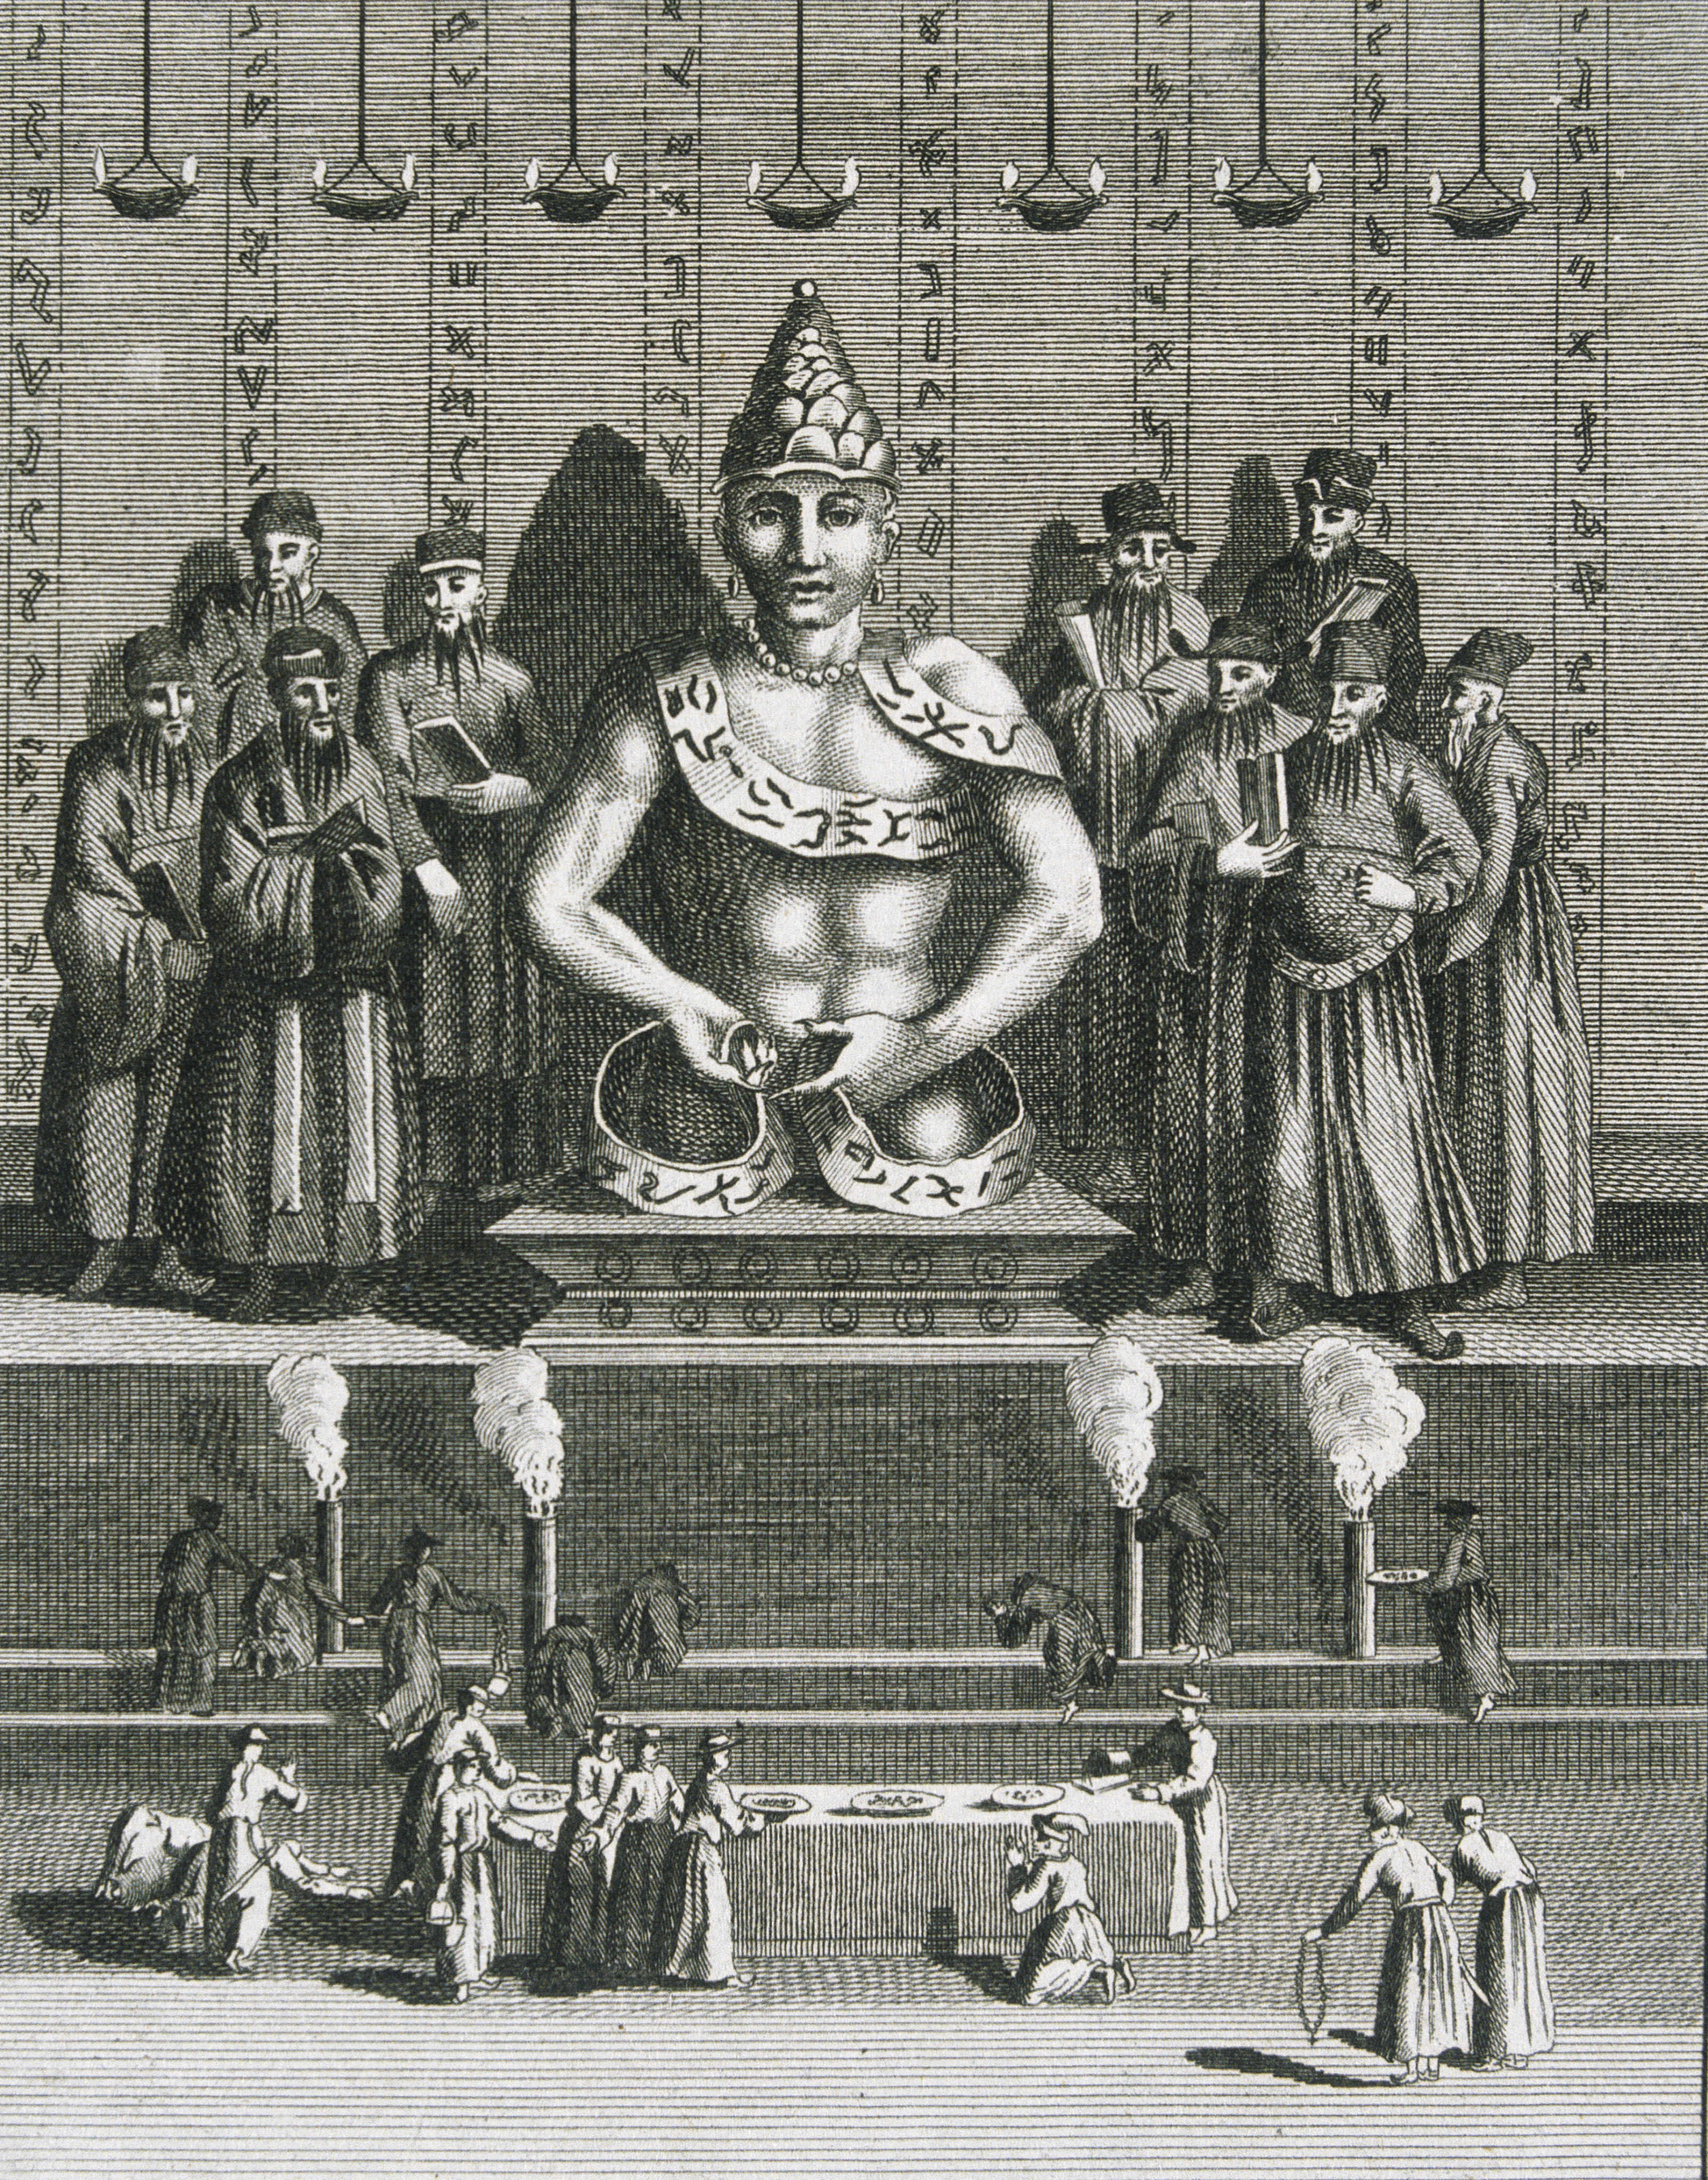 An 18th century engraving of the image of Confucius being worshipped. American philosophy professor Stephen Angle has written a guide to the Confucian moral code. Photo: Hulton-Deutsch Collection/Corbis via Getty Images